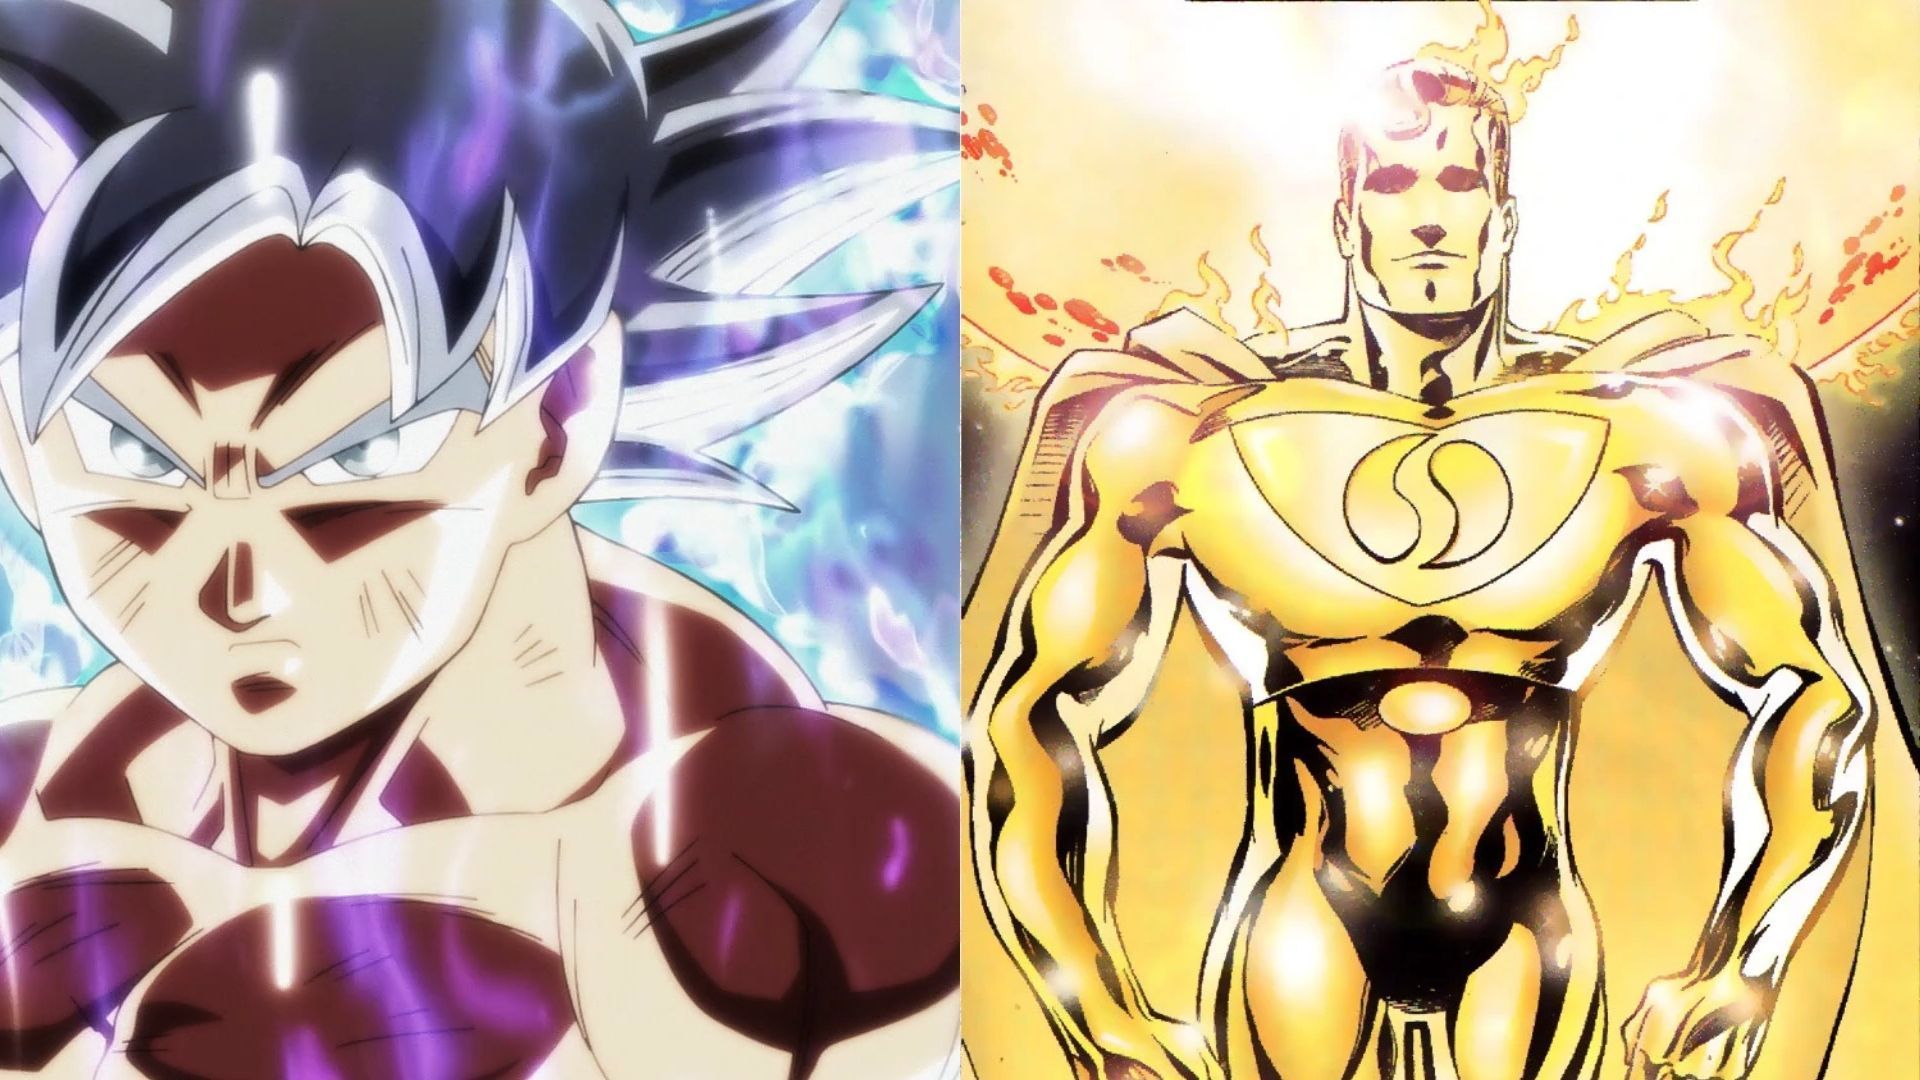 Ultra Instinct Goku (left) and Superman Prime (right) is a matchup of titanic proportions (Image via Sportskeeda)